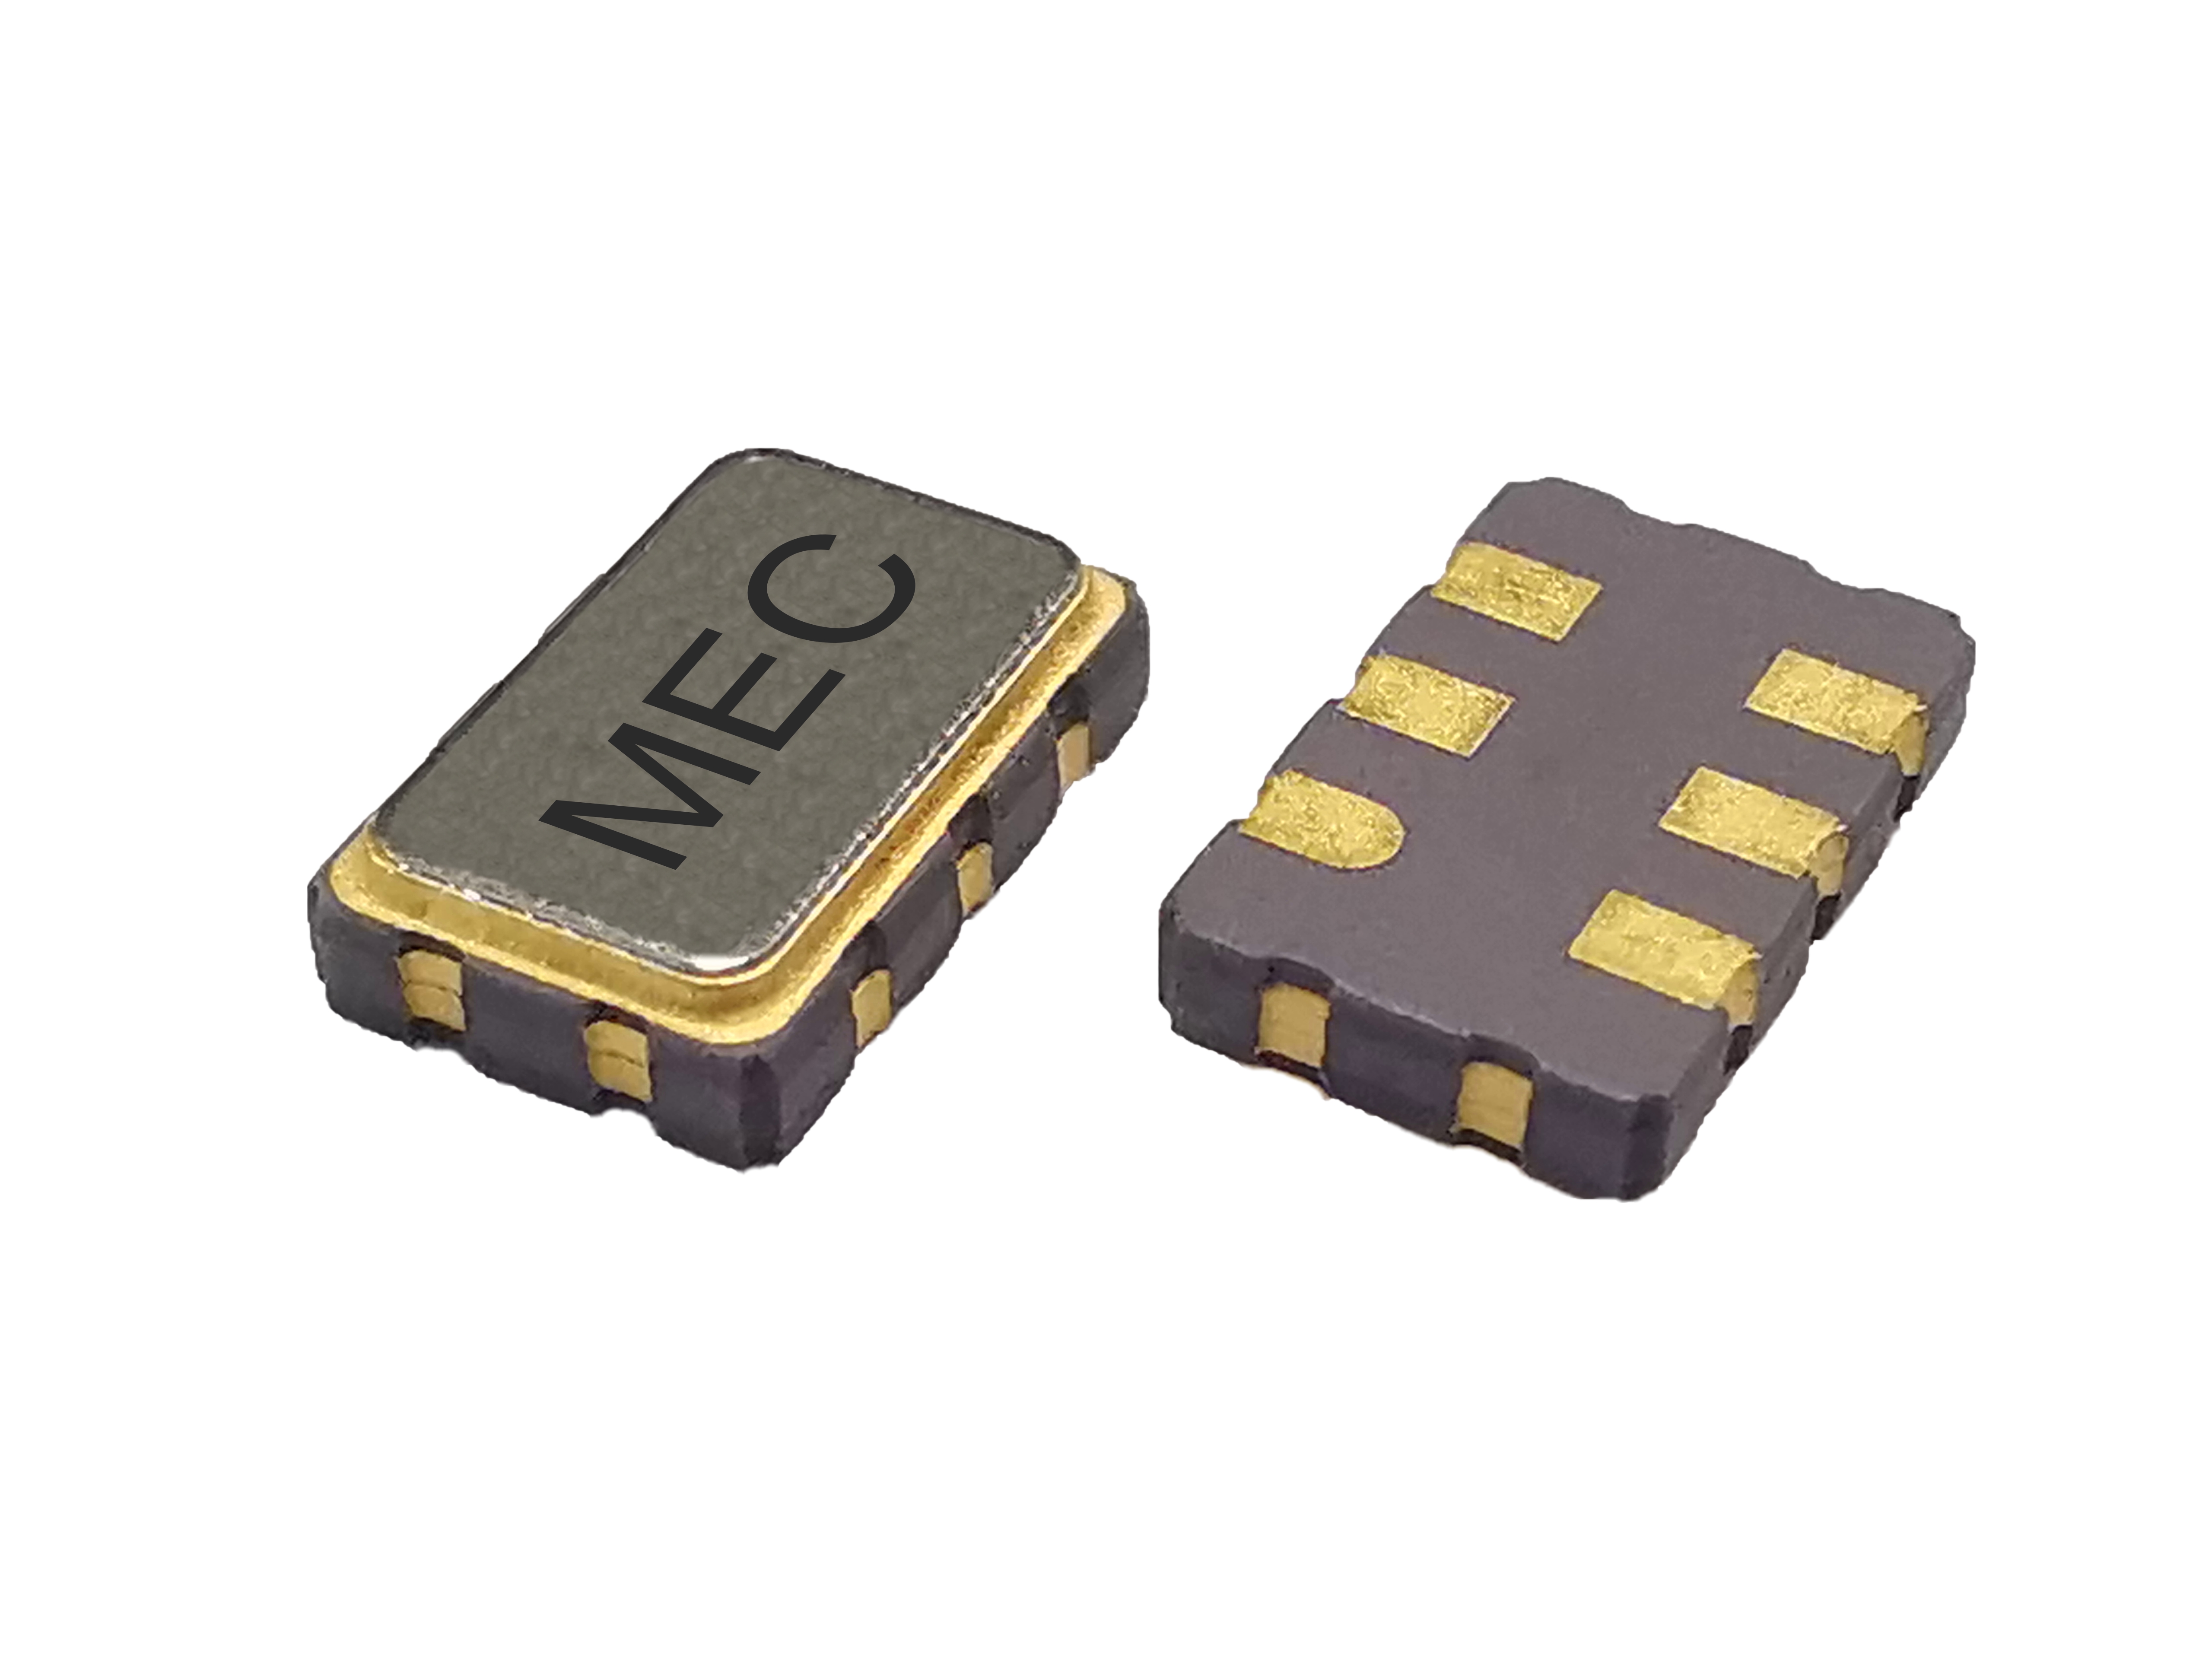 HCPQF536 5032 2.5V Quick-Turn Programmable Frequency Swithable Differential LVPECL SMD Crystal Oscillator